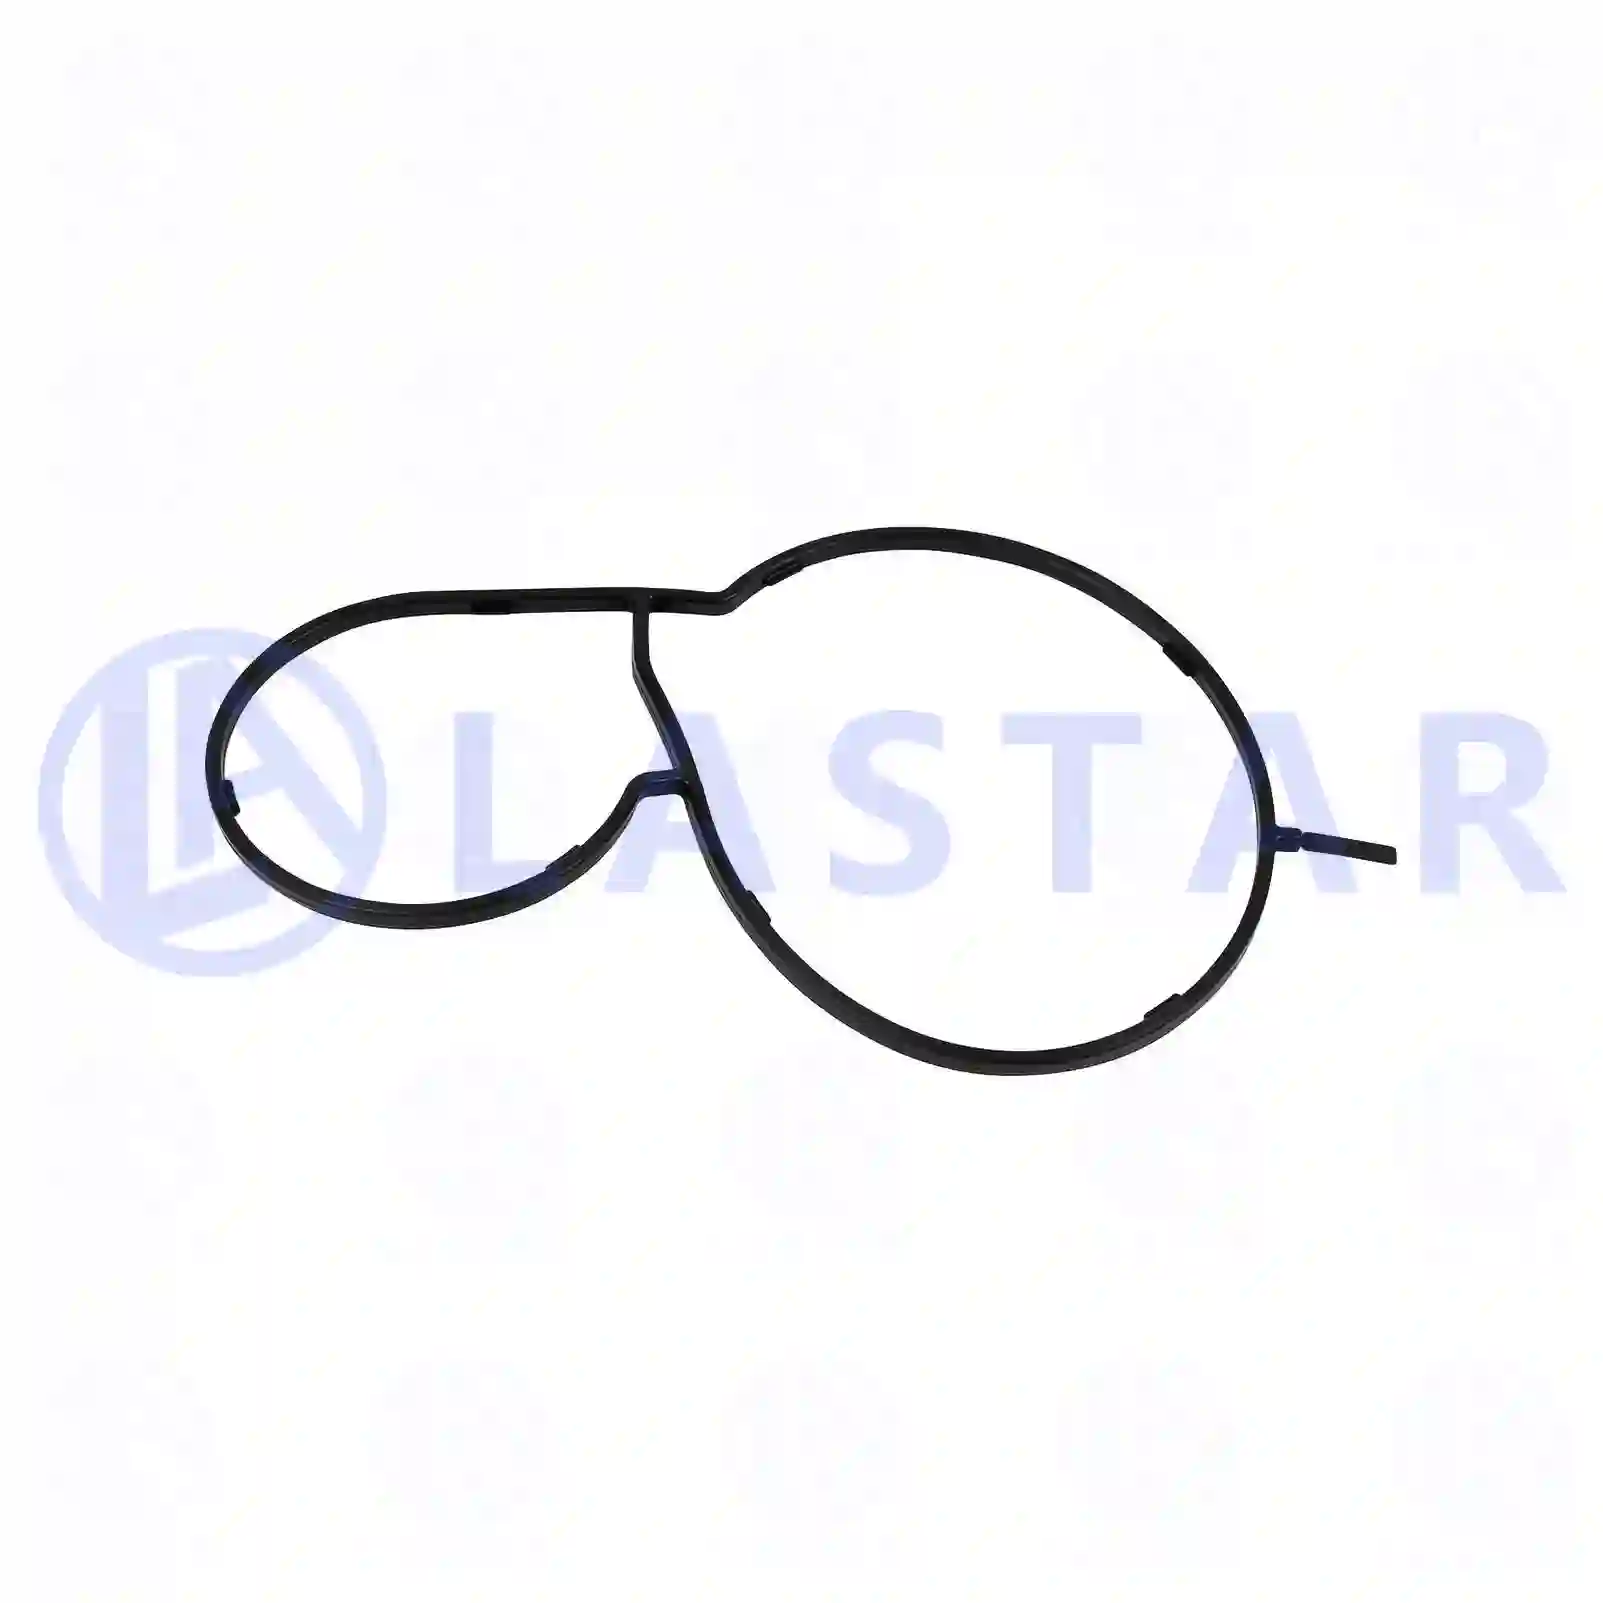 Gasket, planetary gear cylinder, 77733225, 1530298, 2108947, ZG30504-0008 ||  77733225 Lastar Spare Part | Truck Spare Parts, Auotomotive Spare Parts Gasket, planetary gear cylinder, 77733225, 1530298, 2108947, ZG30504-0008 ||  77733225 Lastar Spare Part | Truck Spare Parts, Auotomotive Spare Parts